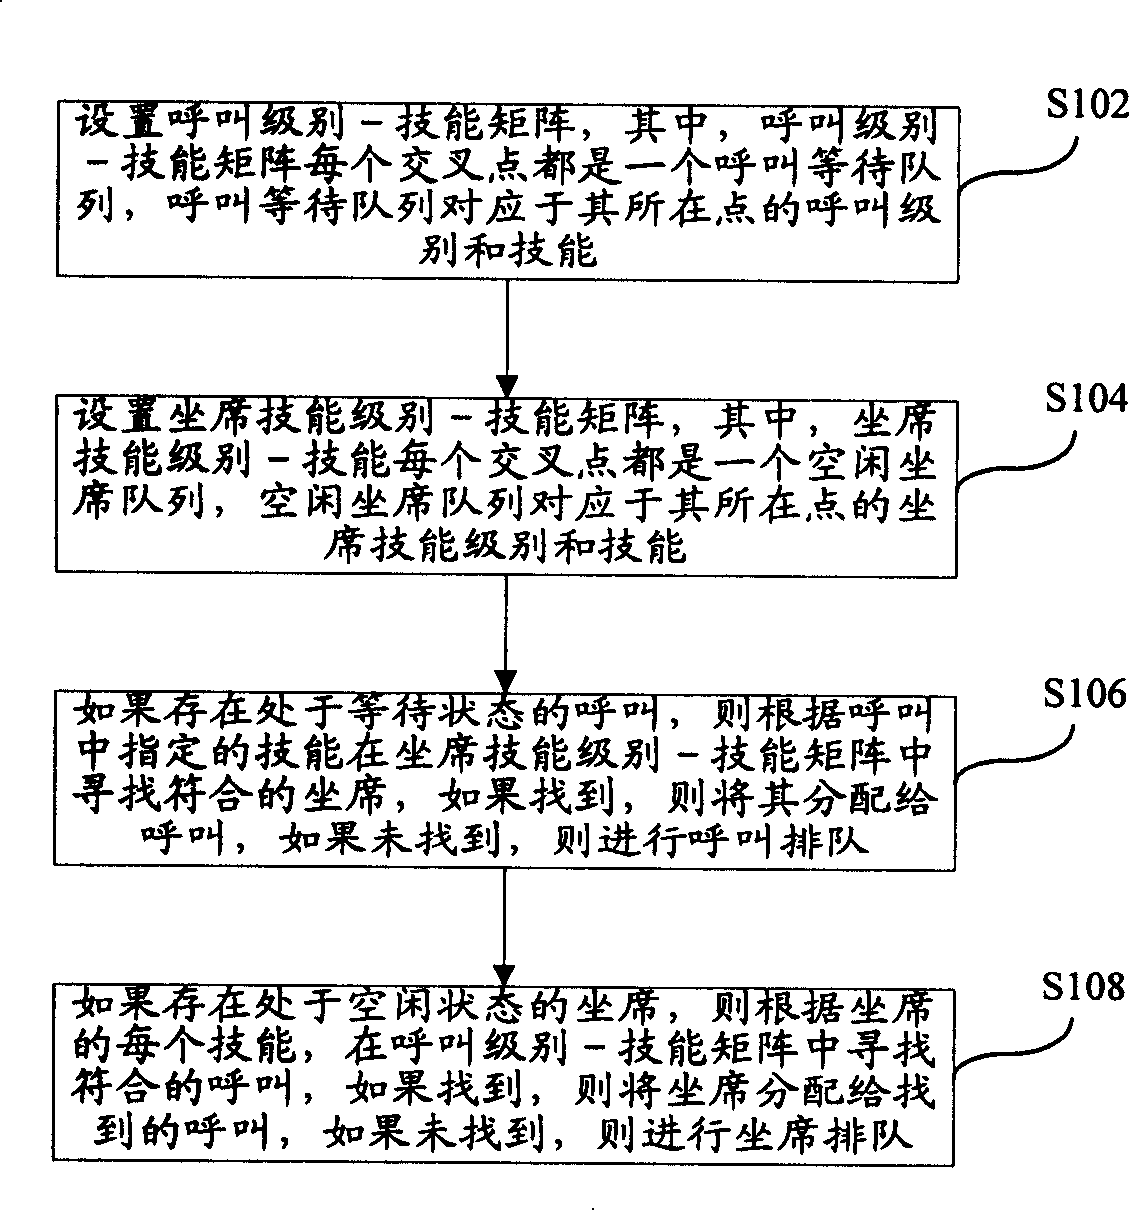 Hierarchical service routing method for customer service system